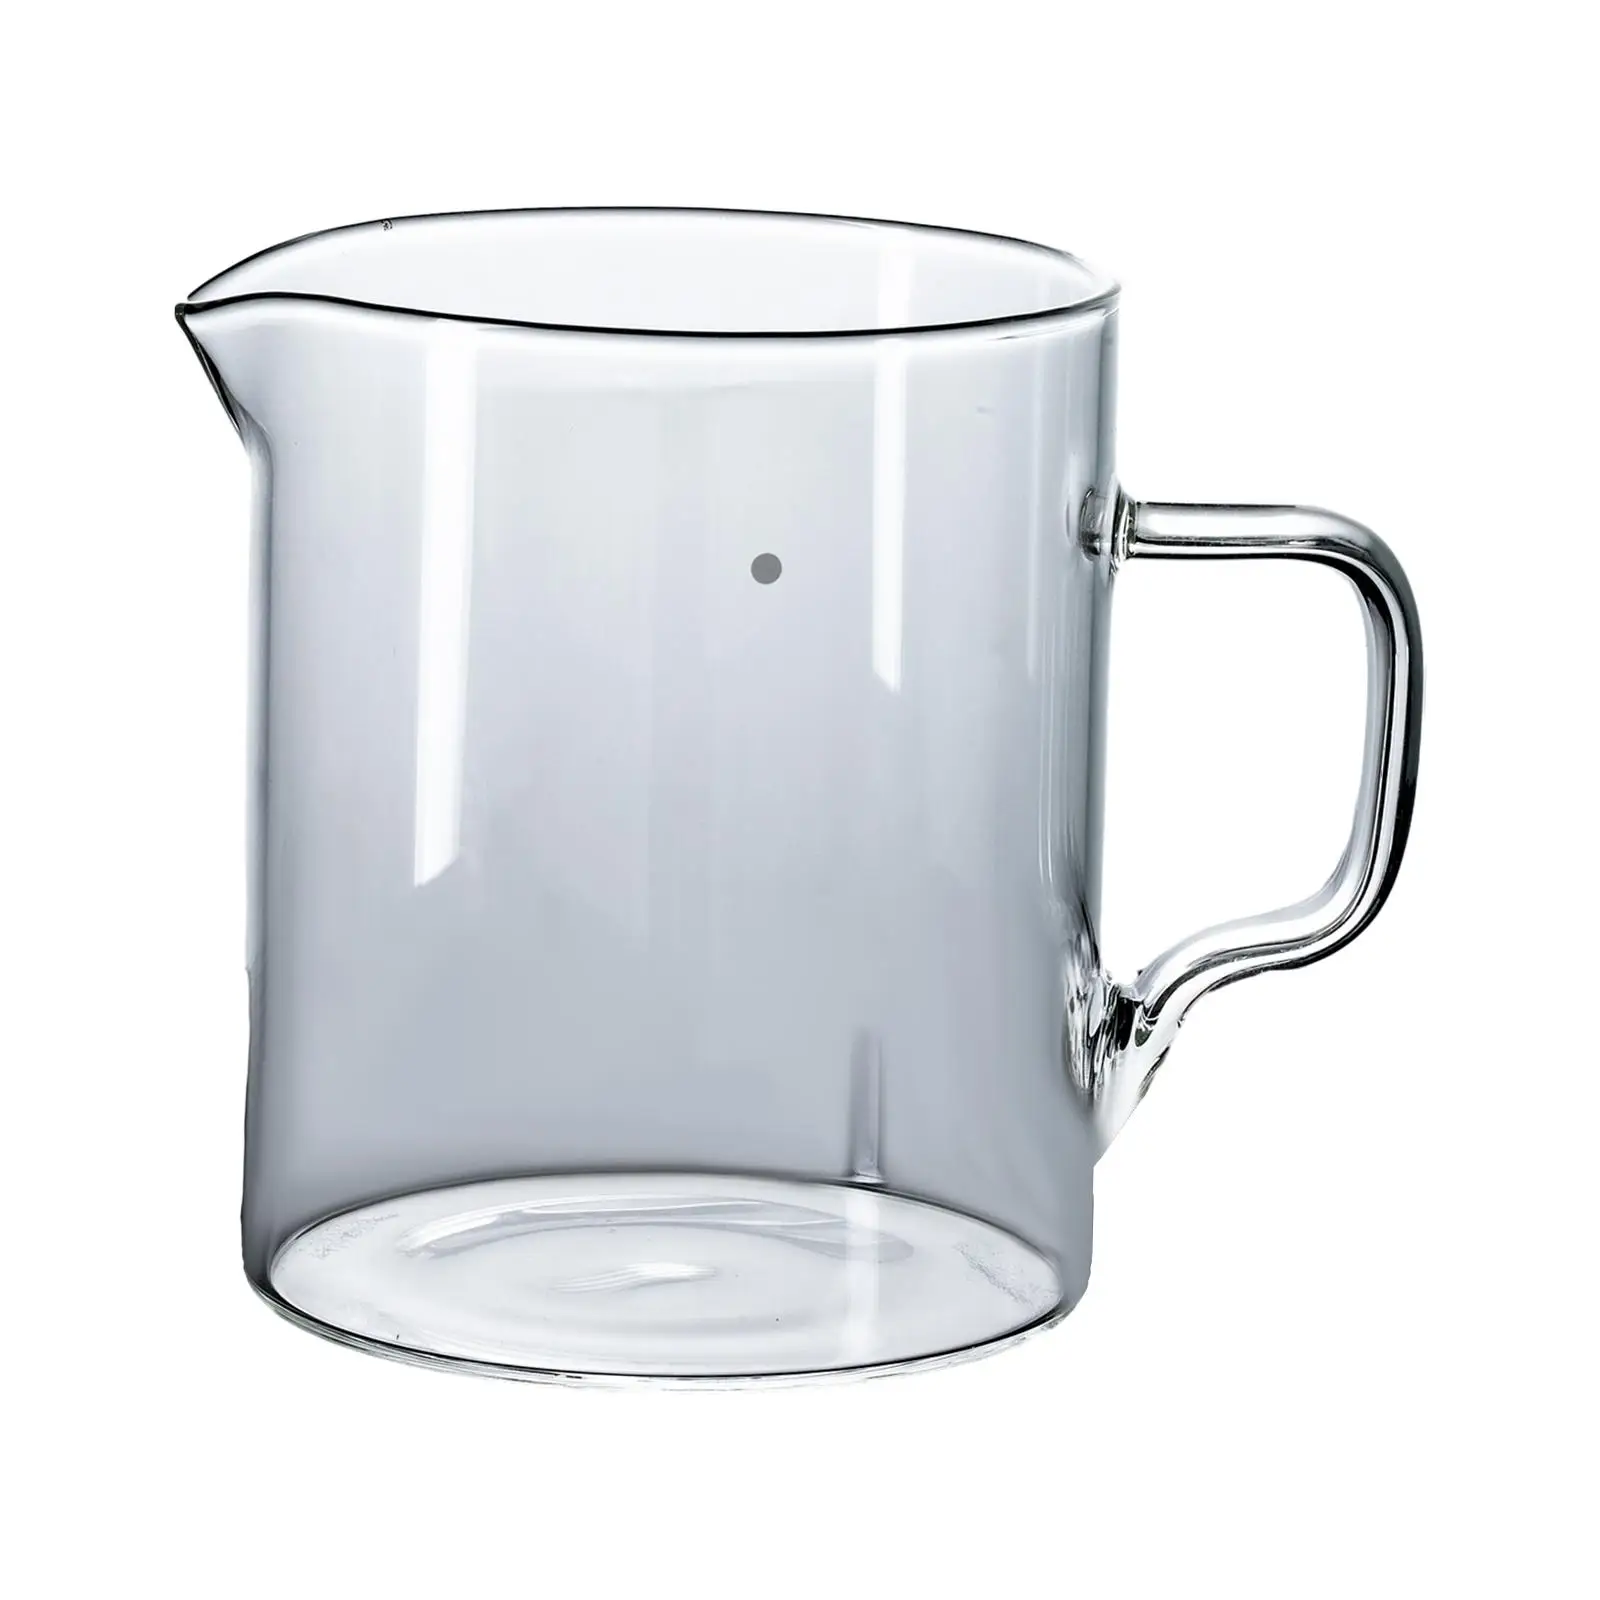 Glass Coffee Pot Coffee Utensils Practical Coffee Maker Kettle Coffee Dripper Pot for Office Home Family Restaurant Camping